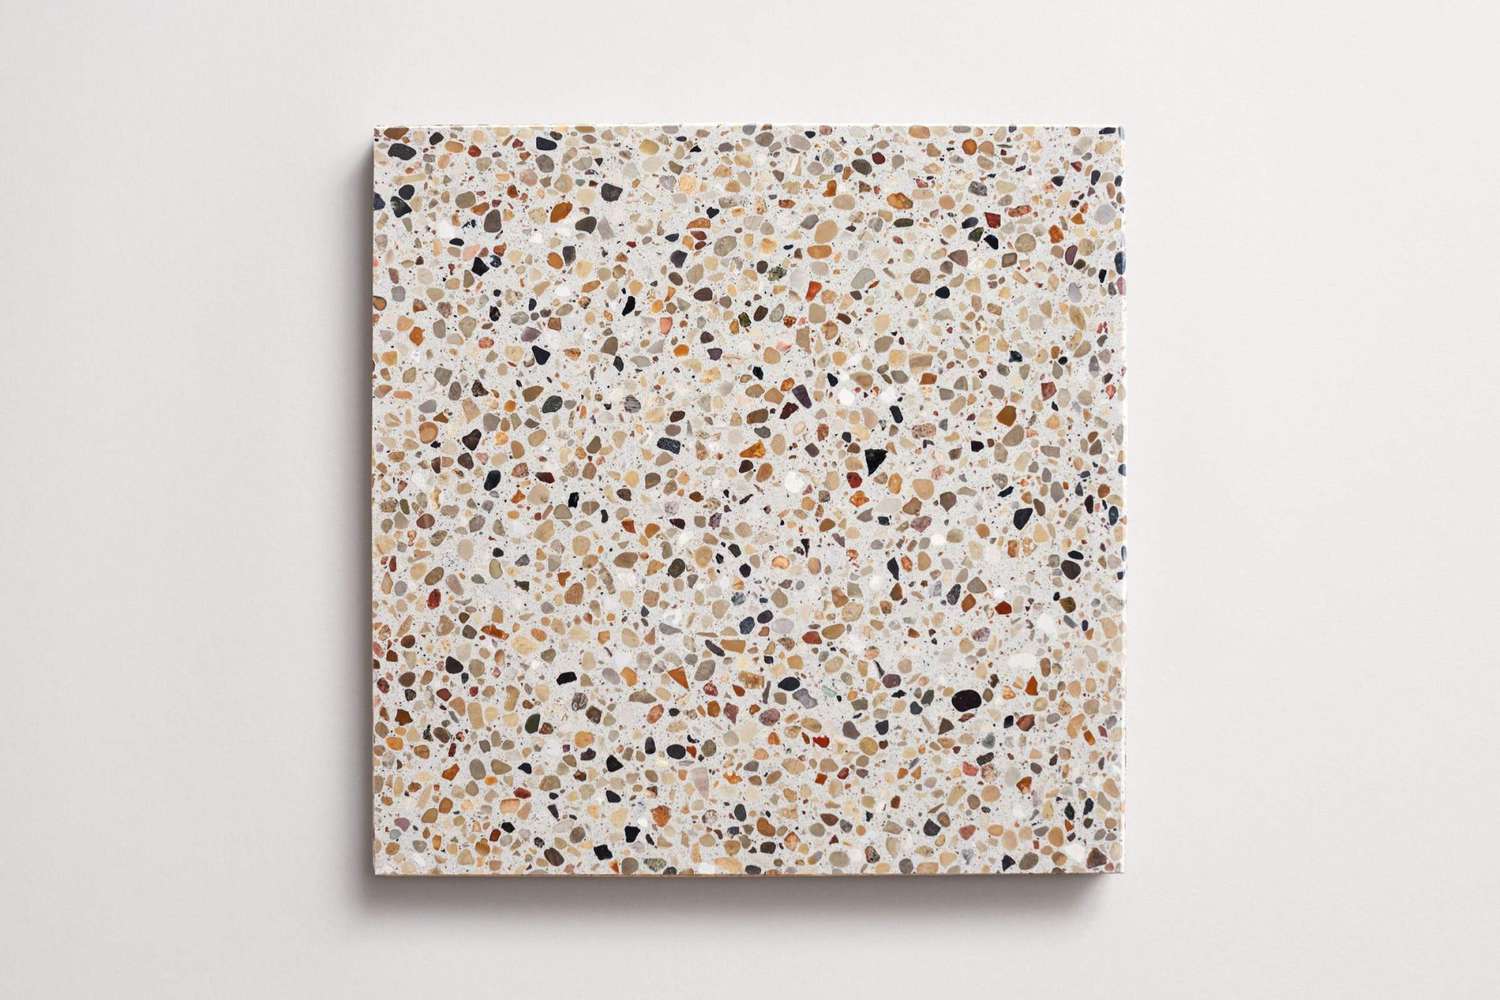 Cle Terrazzo Tile with flecks of color on a square tile